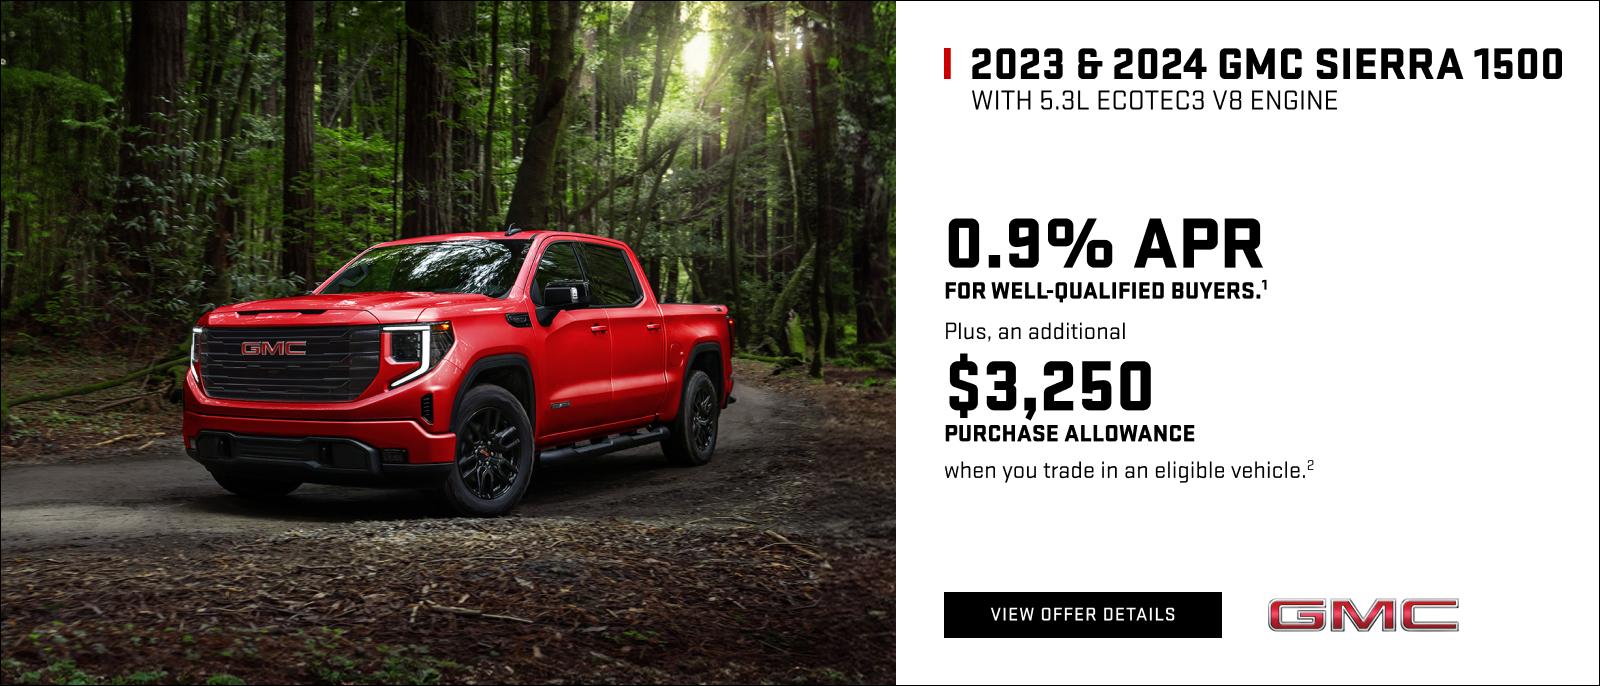 0.9% APR for well-qualified buyers.1

Plus, an additional $3,250 PURCHASE ALLOWANCE when you trade in an eligible vehicle.2